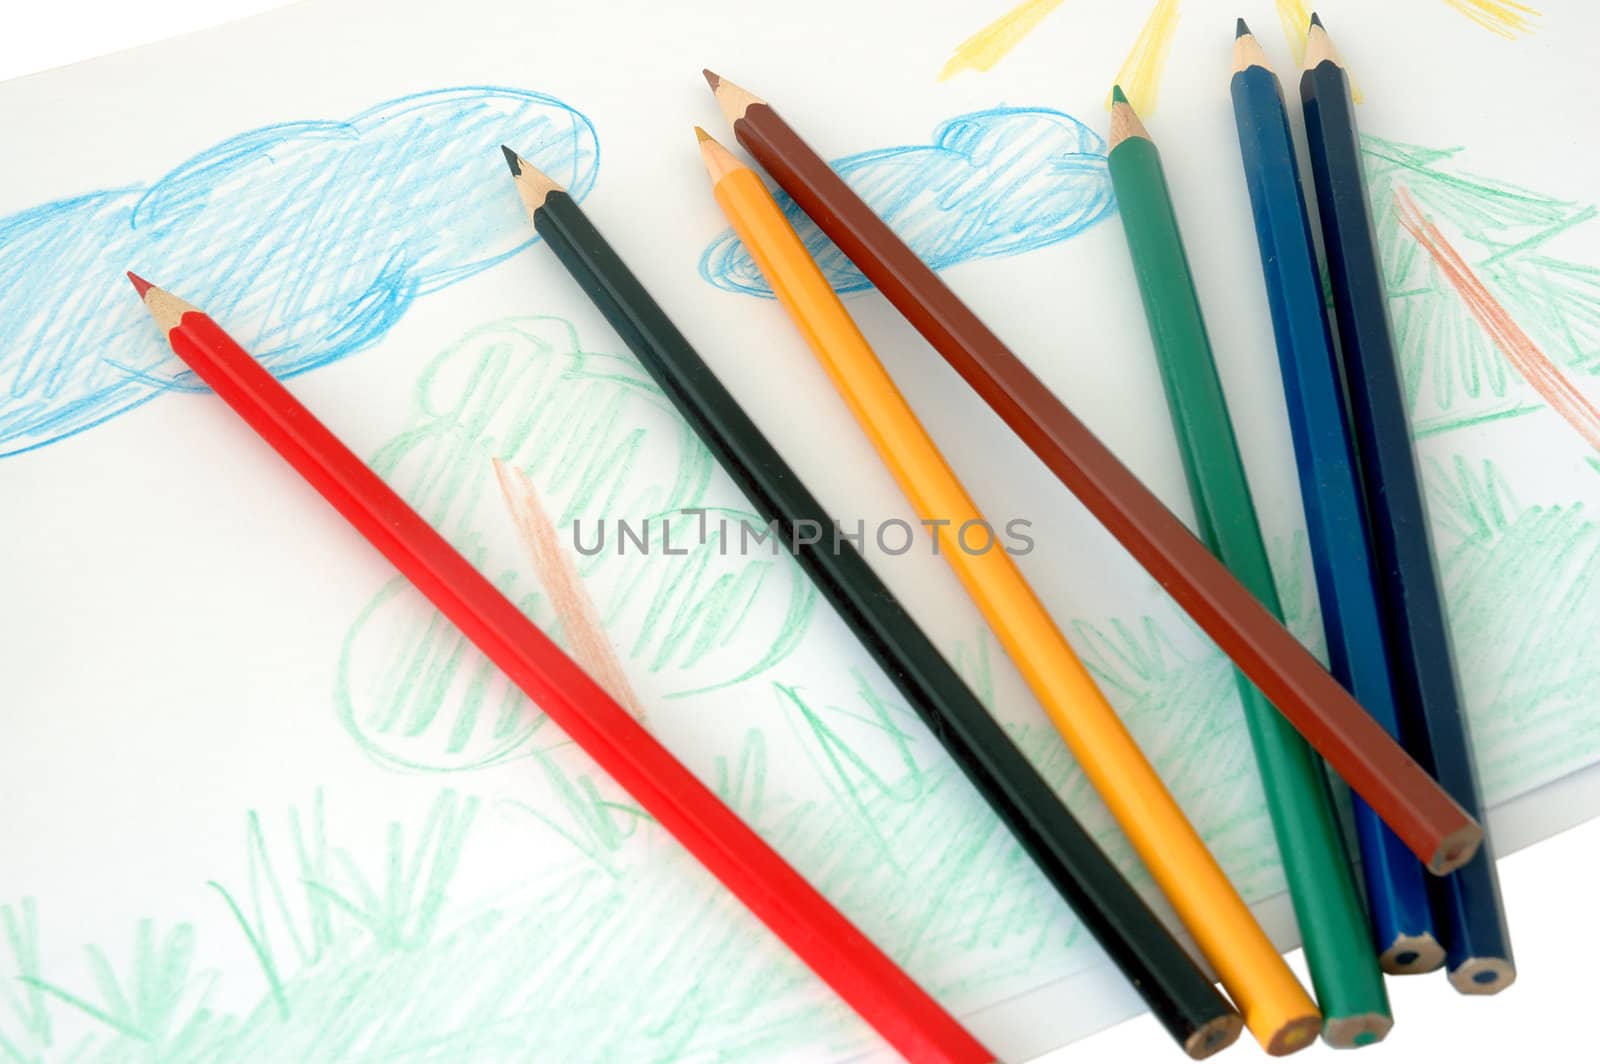 Child's drawing and colored pencils (crayons).